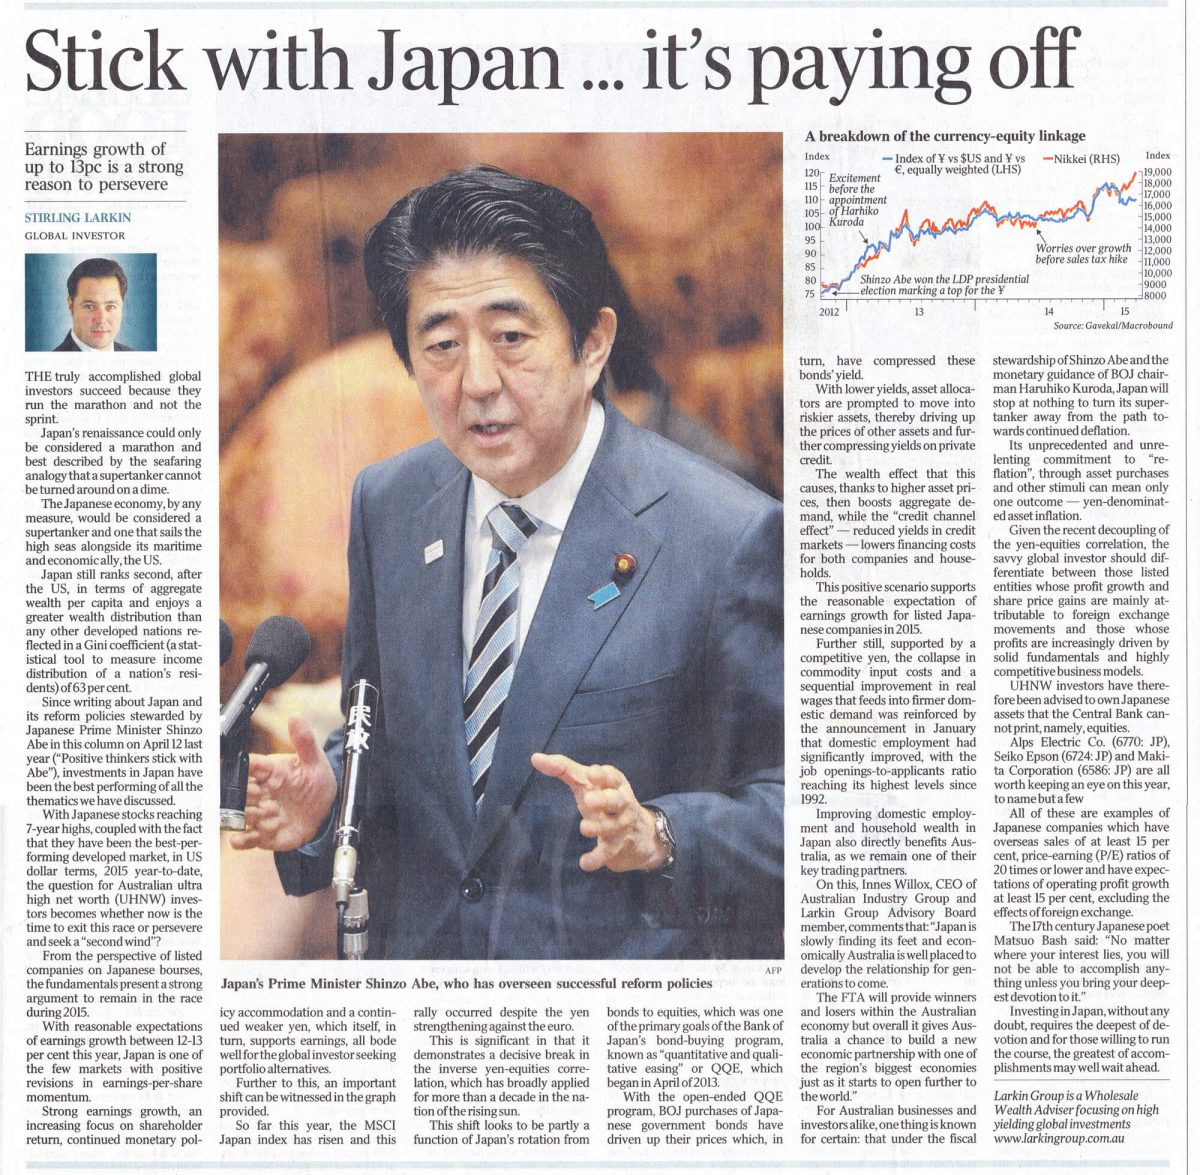 australian standfirst discusses investment in japan in 2015 in the australian newspaper